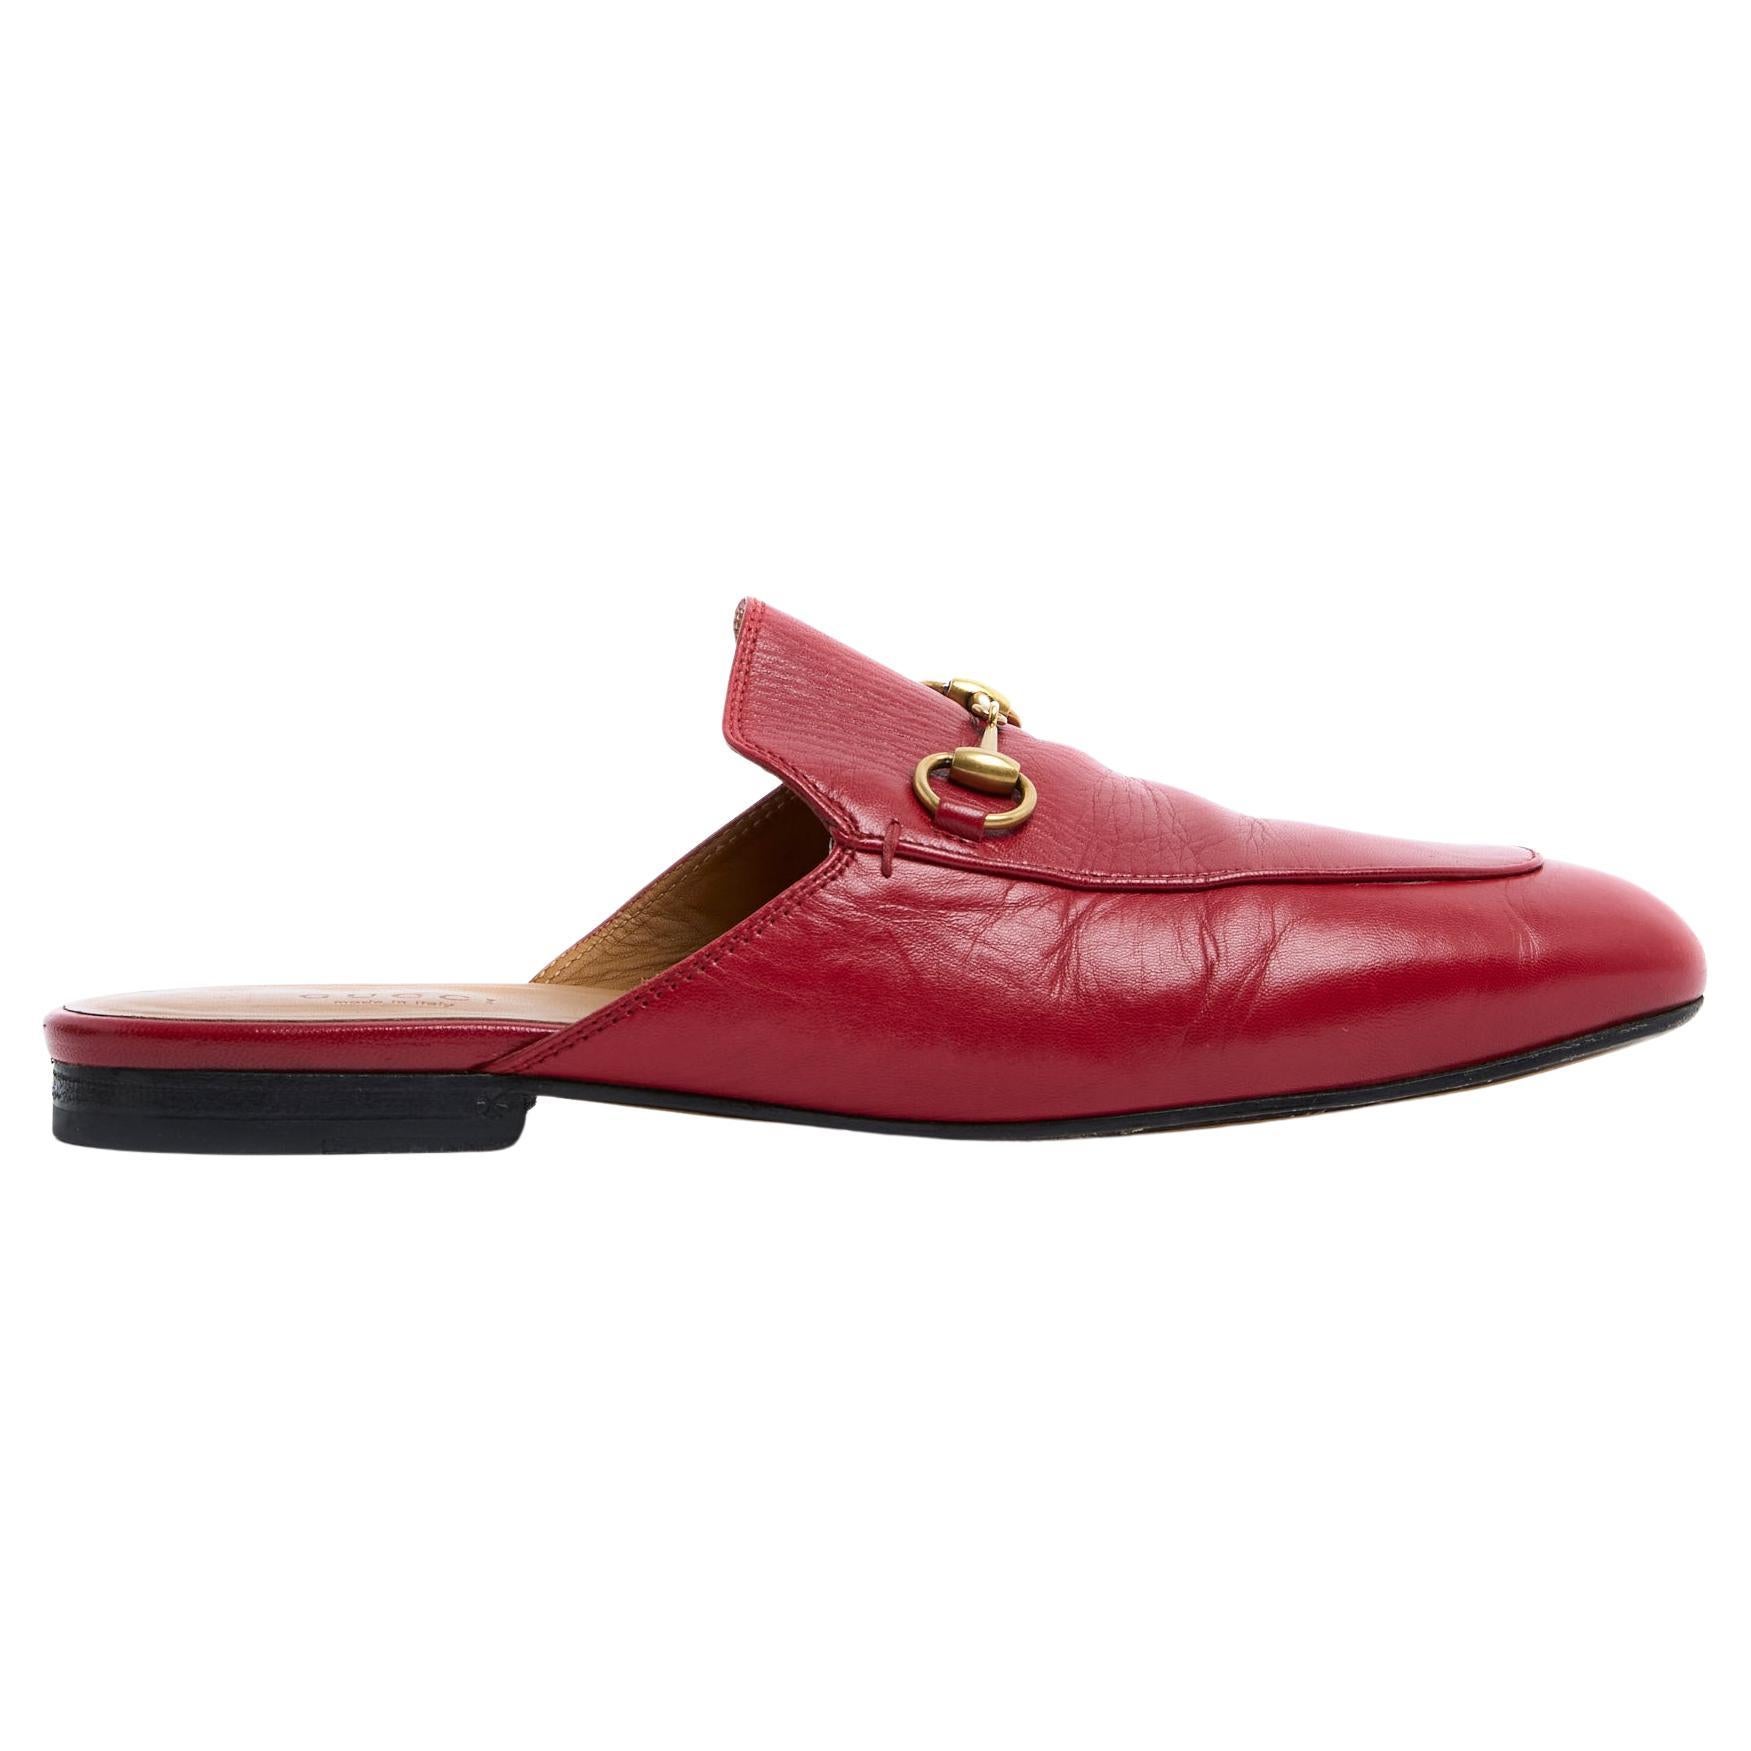 Gucci Princetown red leather Loafers Mules EU39 US8.5 For Sale